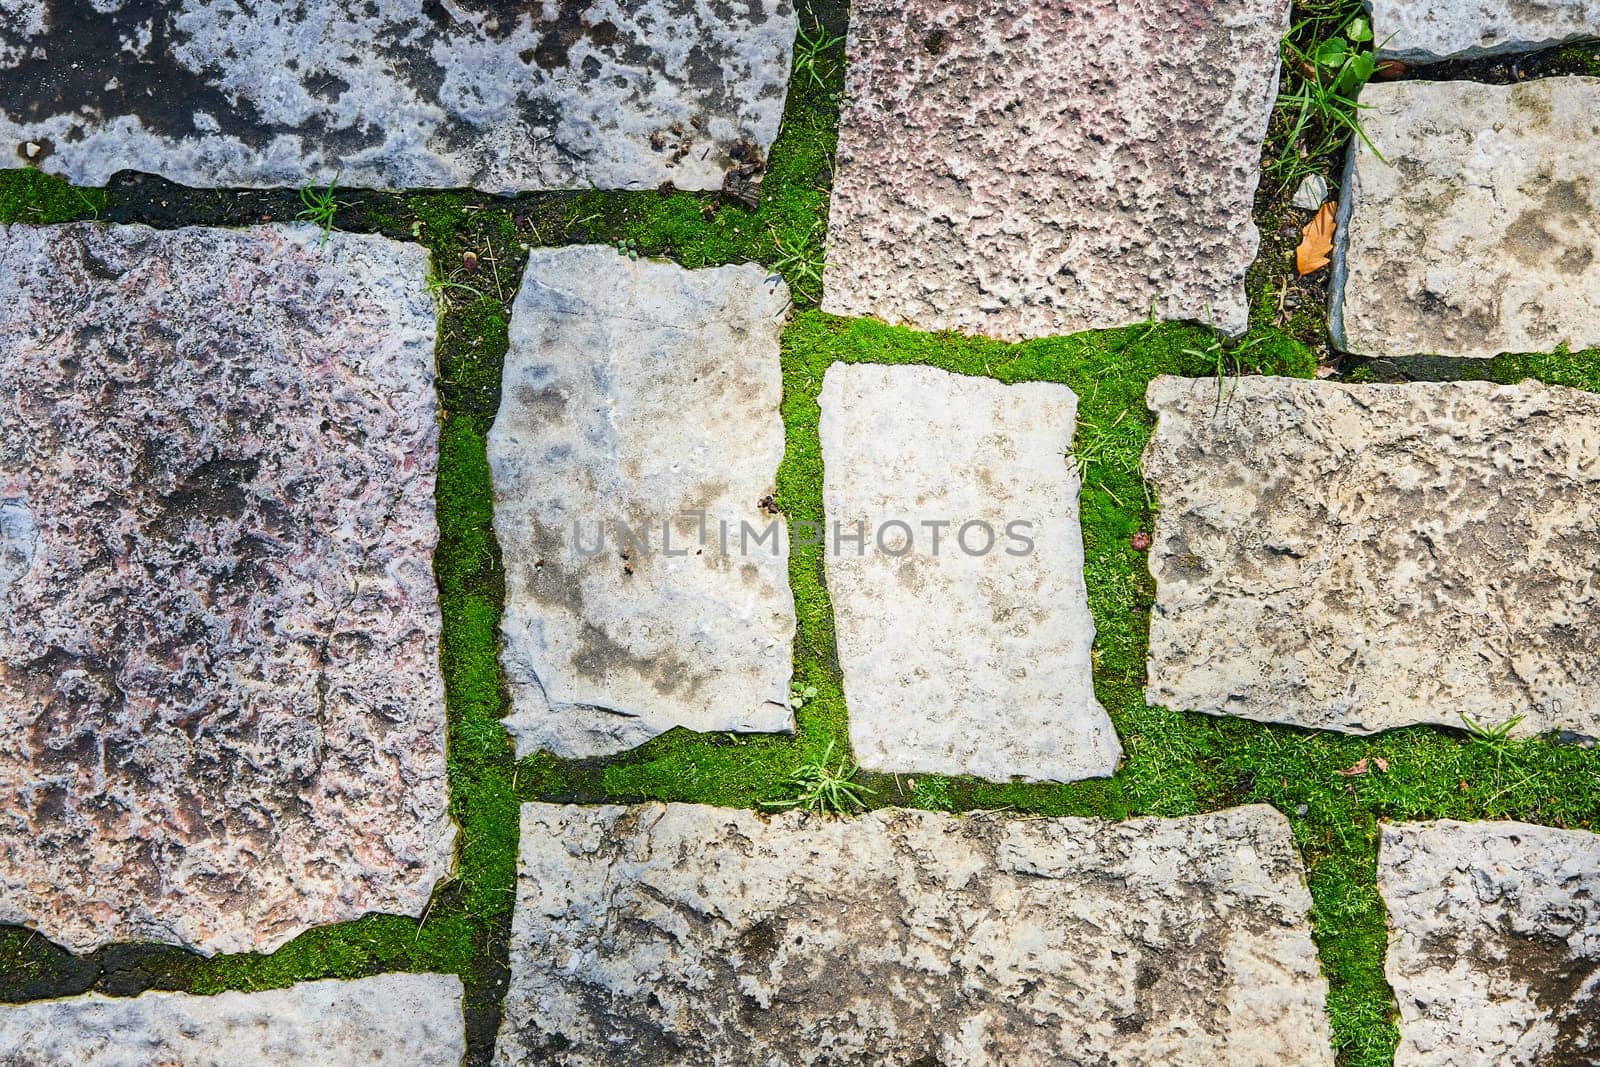 Close-up of colorful stone slabs nestled in vibrant green moss in the Botanic Gardens, Elkhart, Indiana, illustrating nature's resilience and beauty.